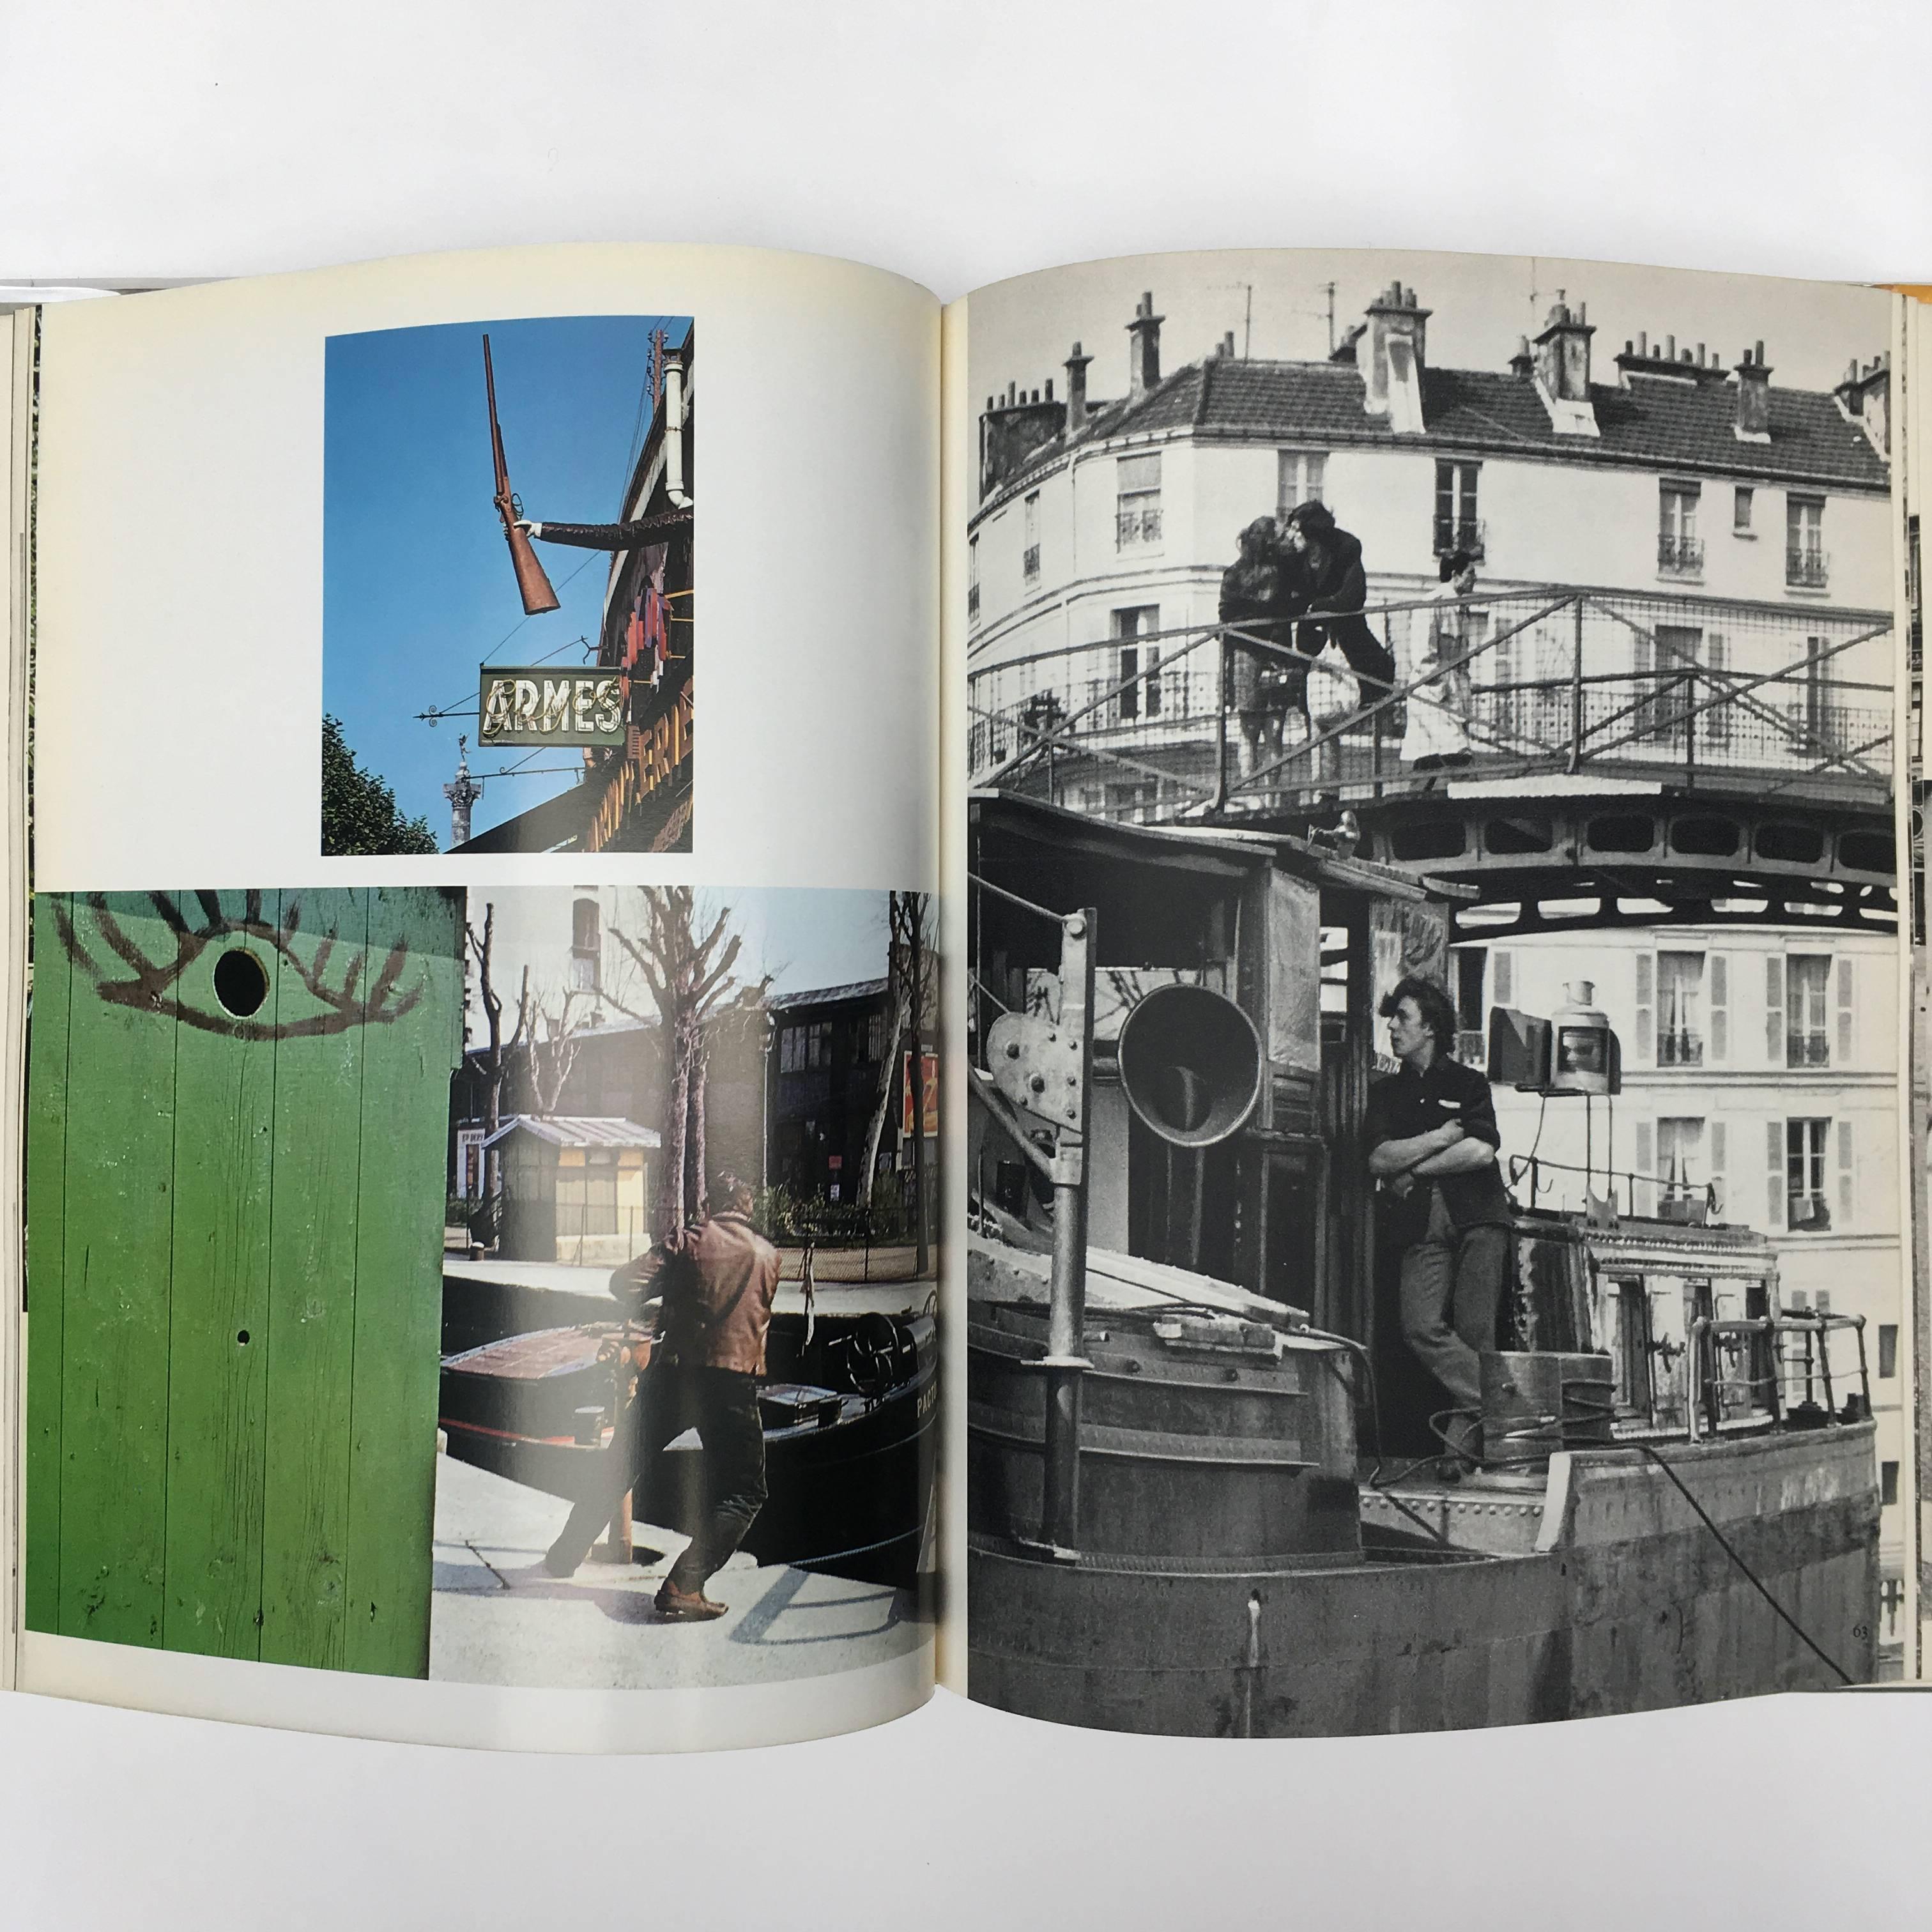 First edition, published by The Macmillan Company, New York, 1972

A delightfully nostalgic look at Paris and it’s people through the words of singer and entertainer Maurice Chevalier, and the photographs of the great Parisian street photographer,